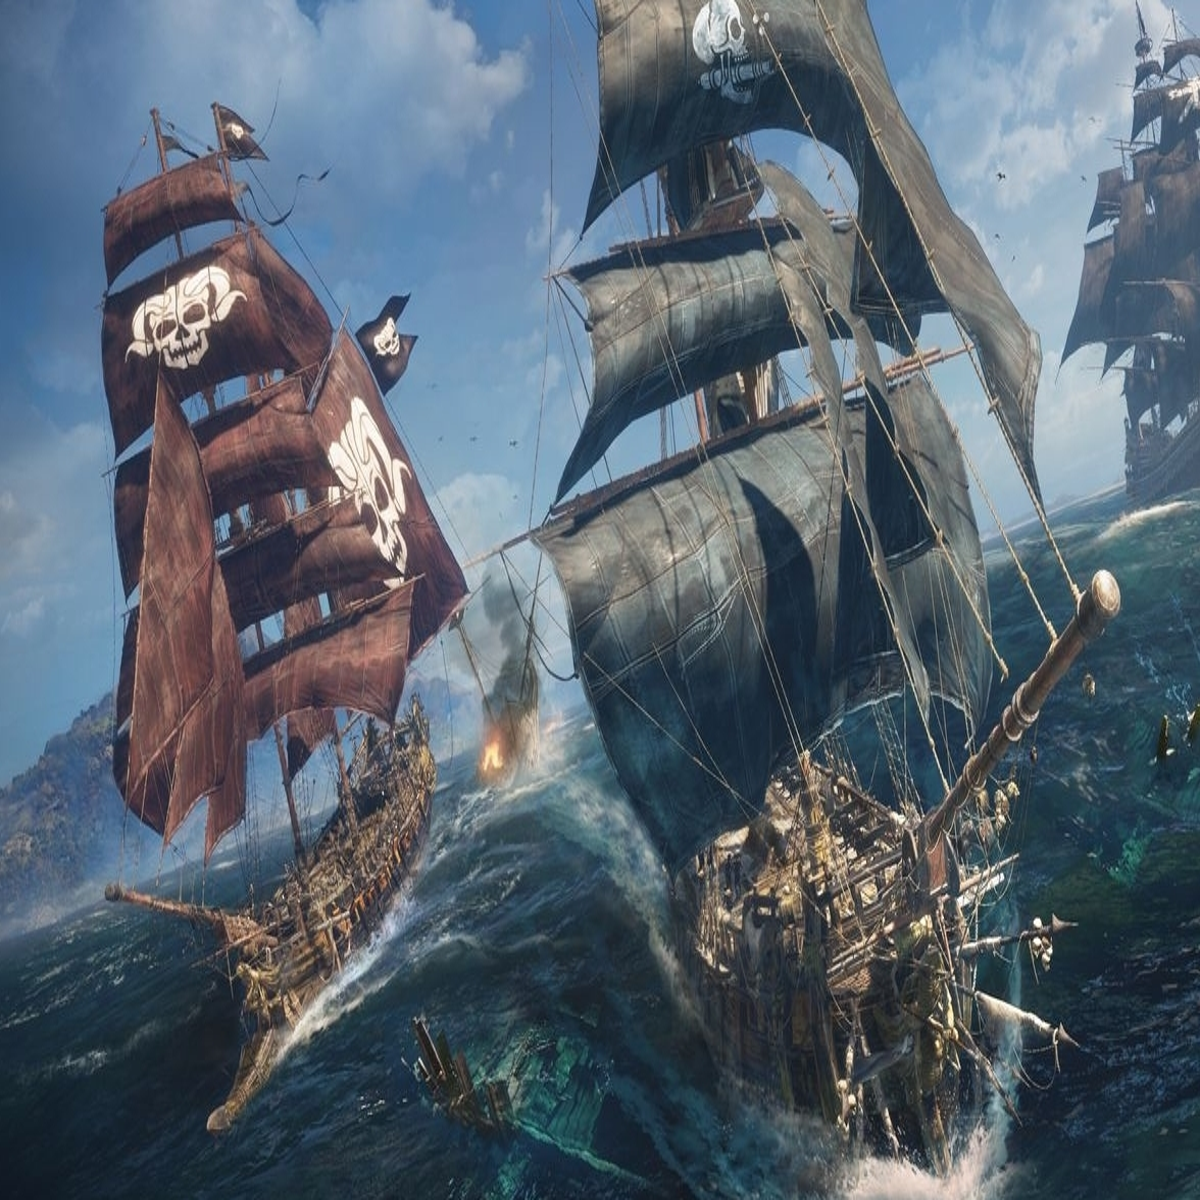 Skull and Bones Trailer Shows Off Ship Customization, Pirate Lairs - IGN